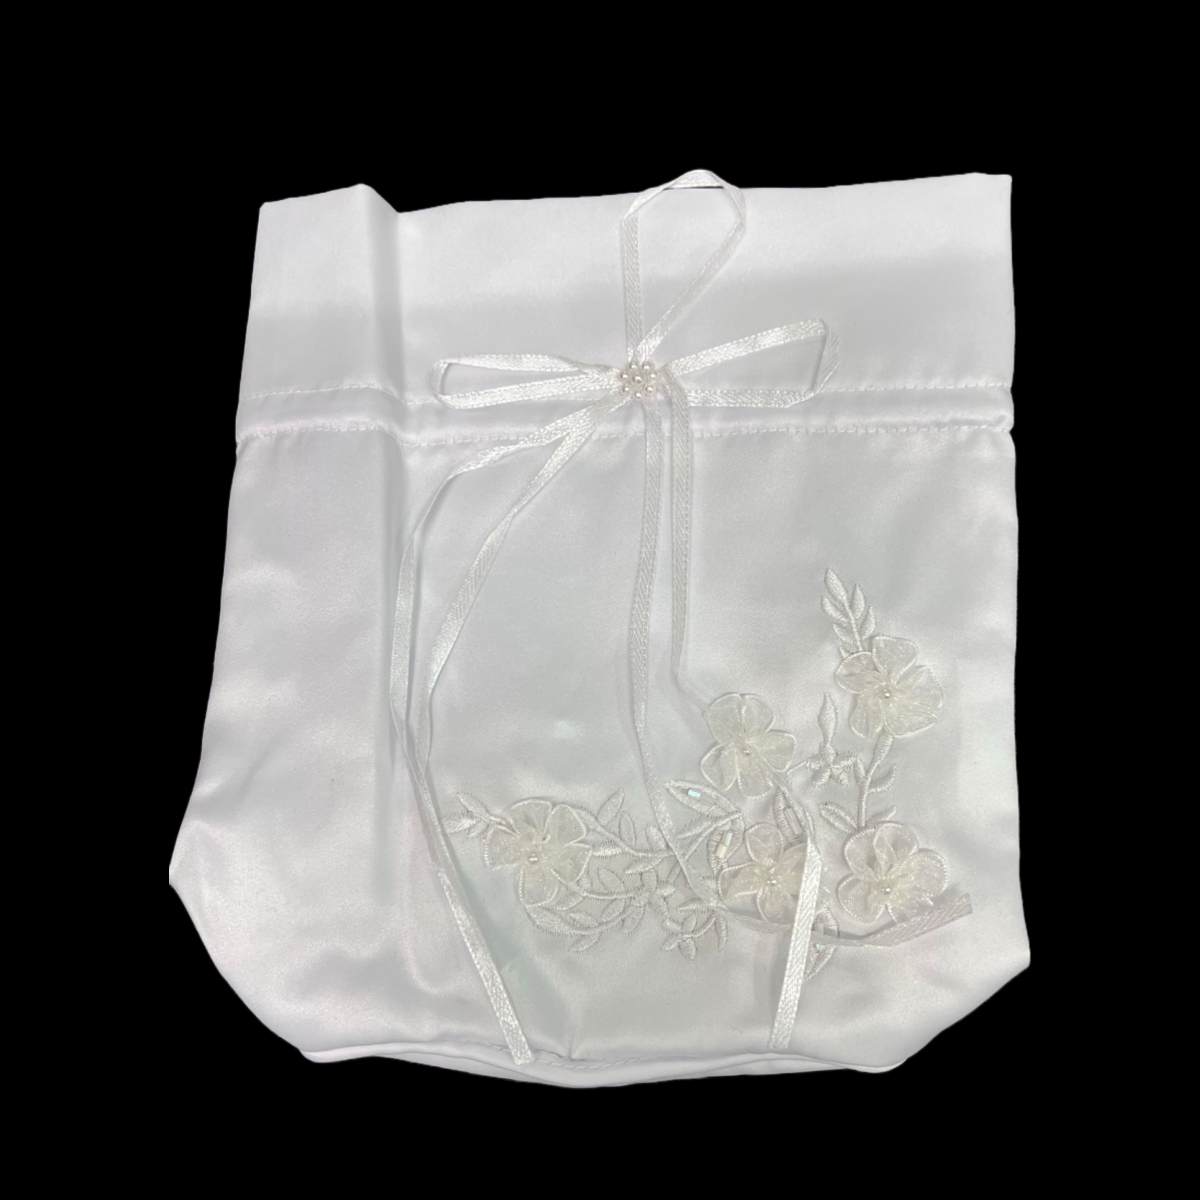 White Satin Ruffled Bag w/ Pearls and Flowers